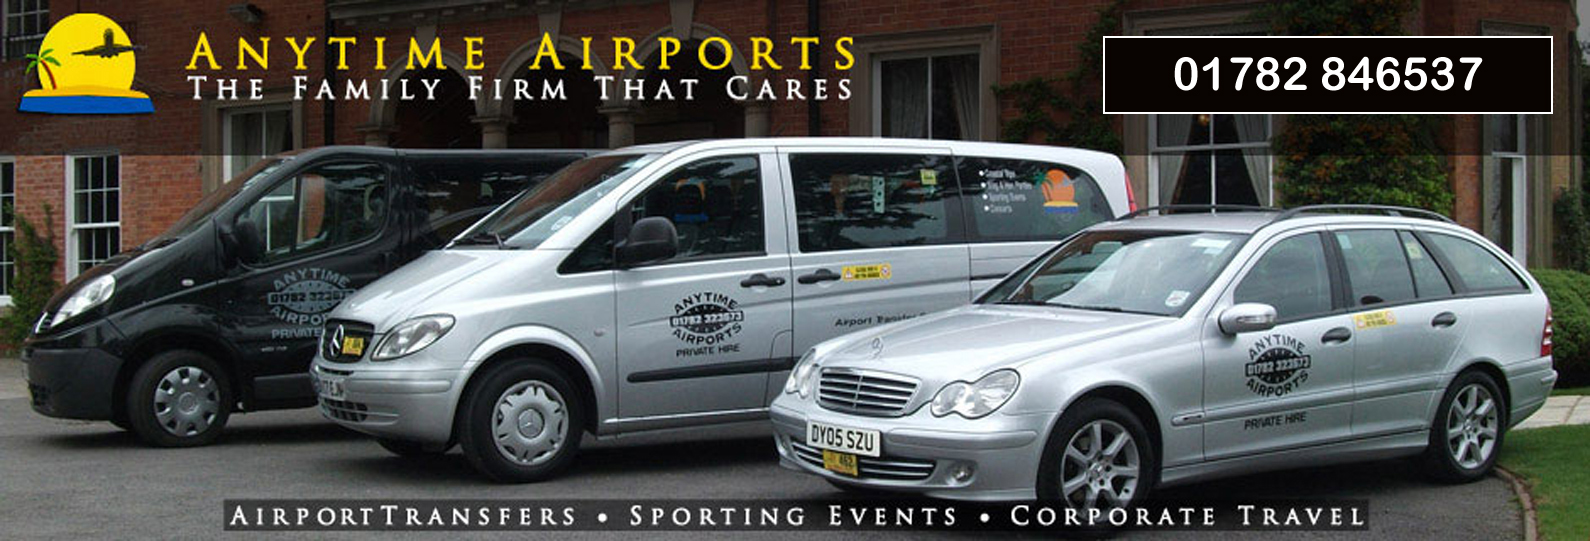 airport transfer vehicles